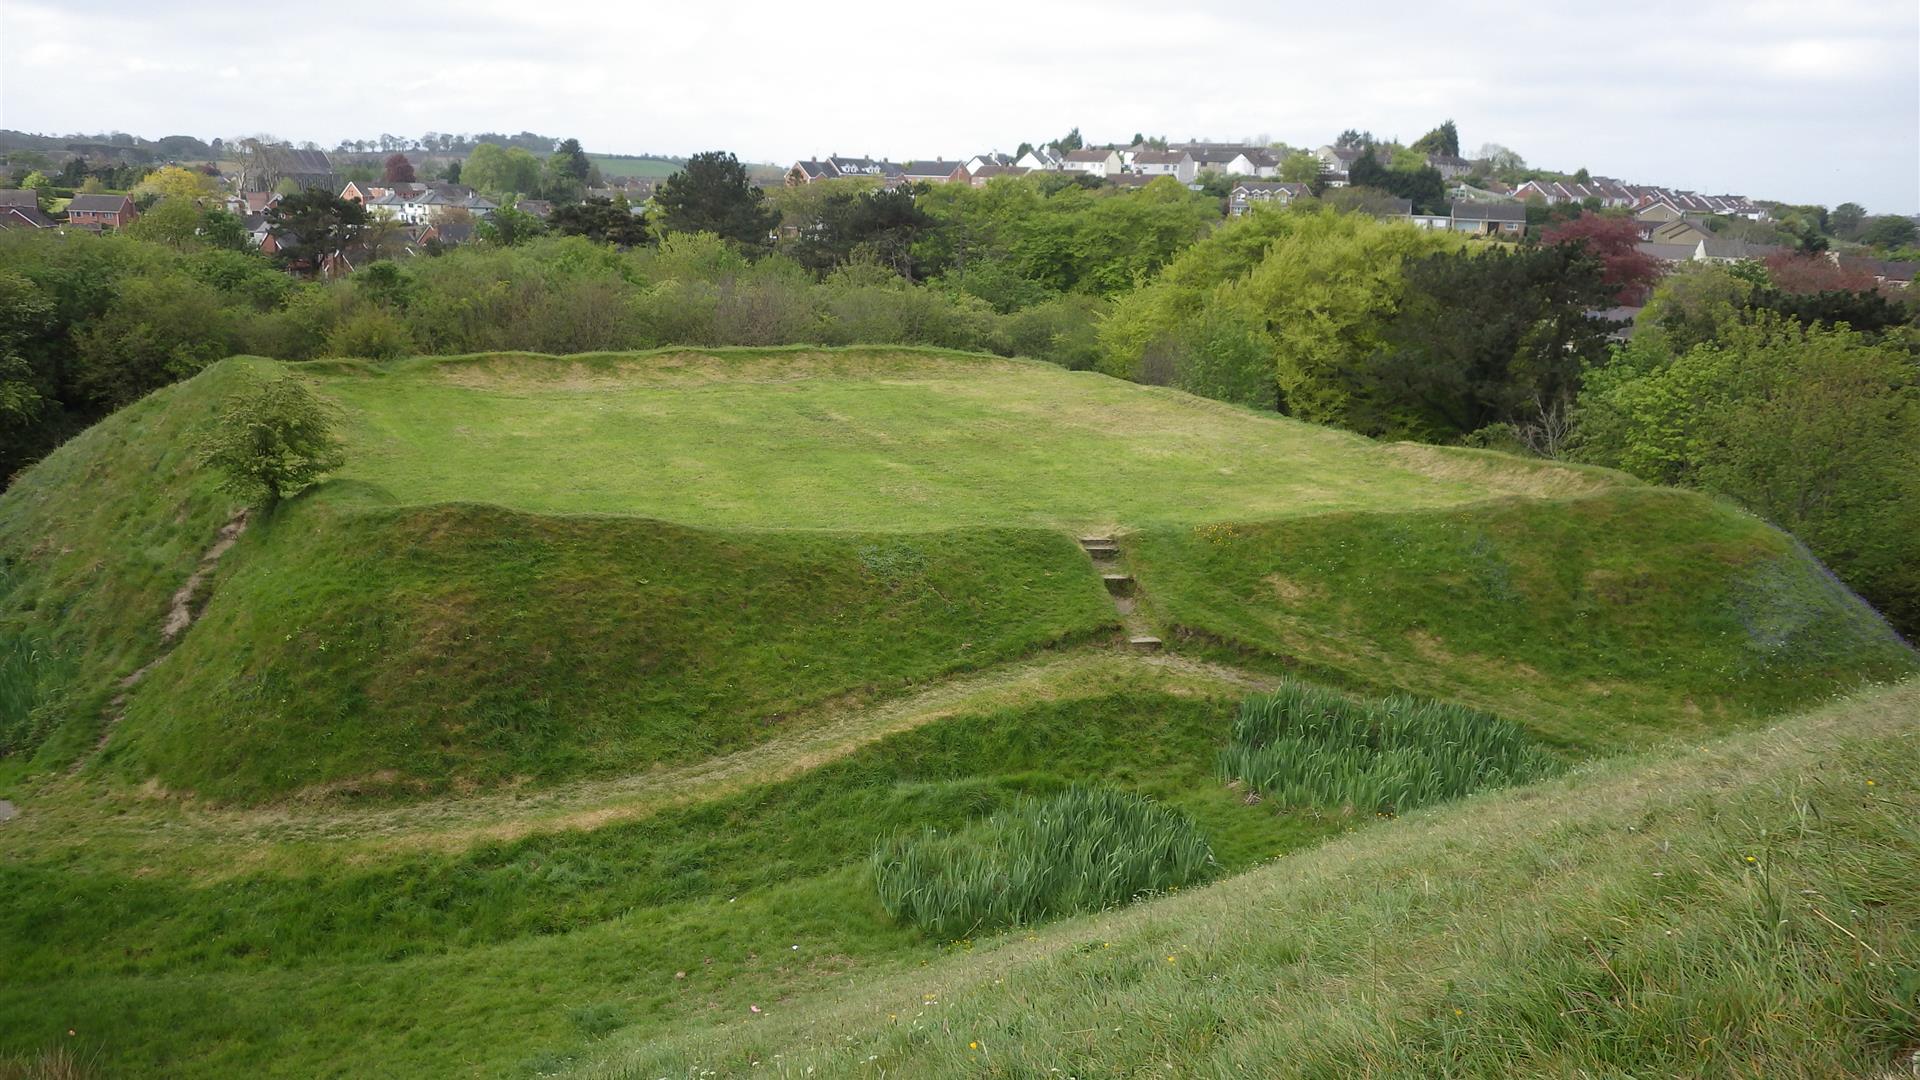 Dromore Motte and Bailey